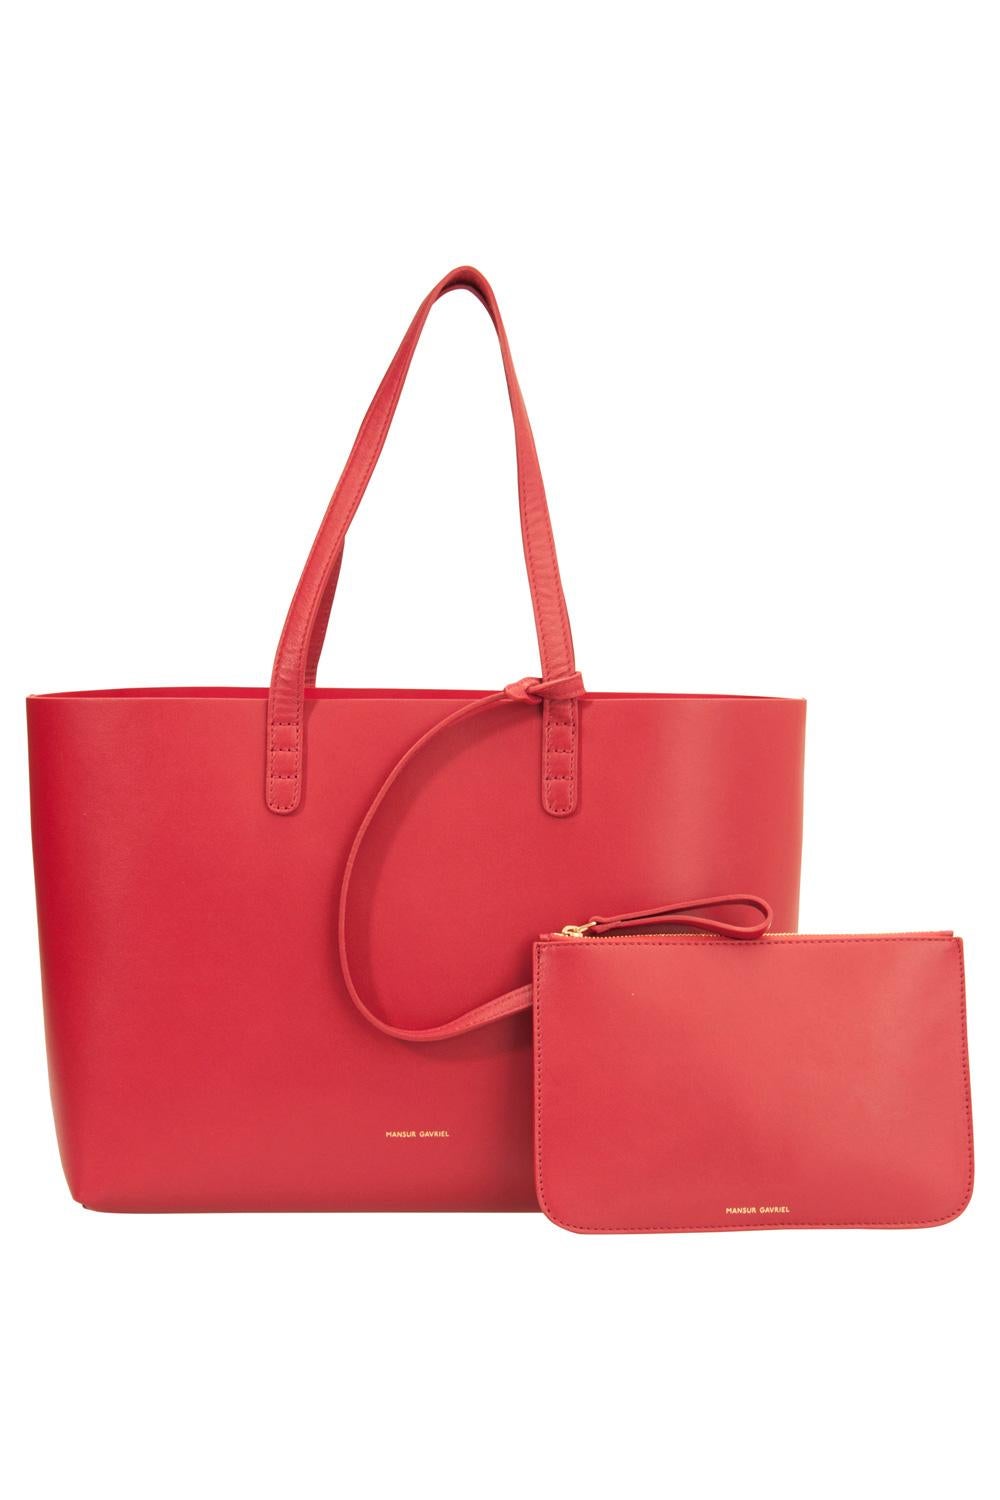 Masterfully crafted with leather and accompanied by a pouch, this luxurious tote essays functional fashion! This piece from Mansur Gavriel features two handles and a spacious leather interior. It will be a wonderful everyday accessory.

Includes: